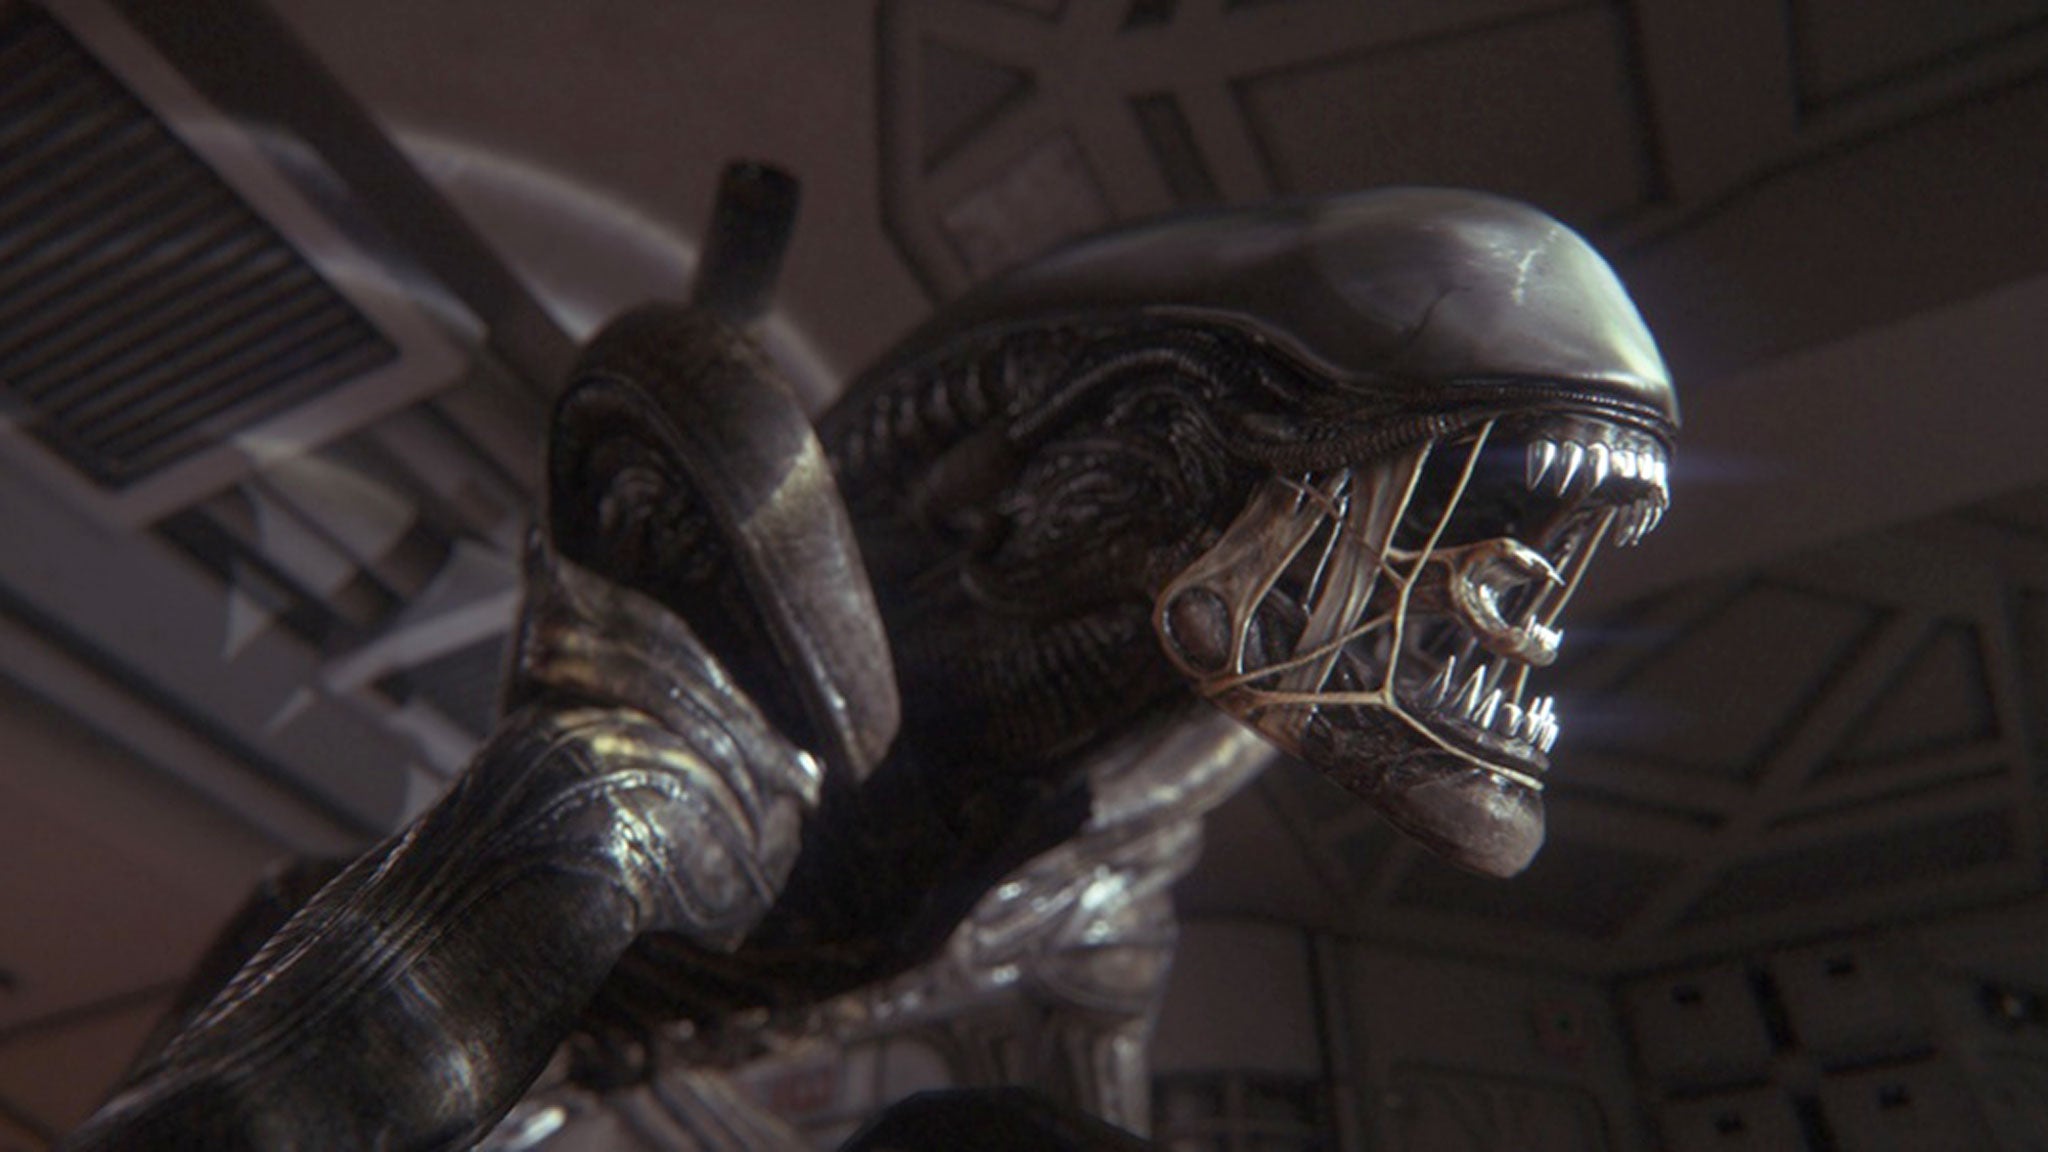 Alien: Isolation stays true to its origins by recreating the feel, look and atmosphere of its source material